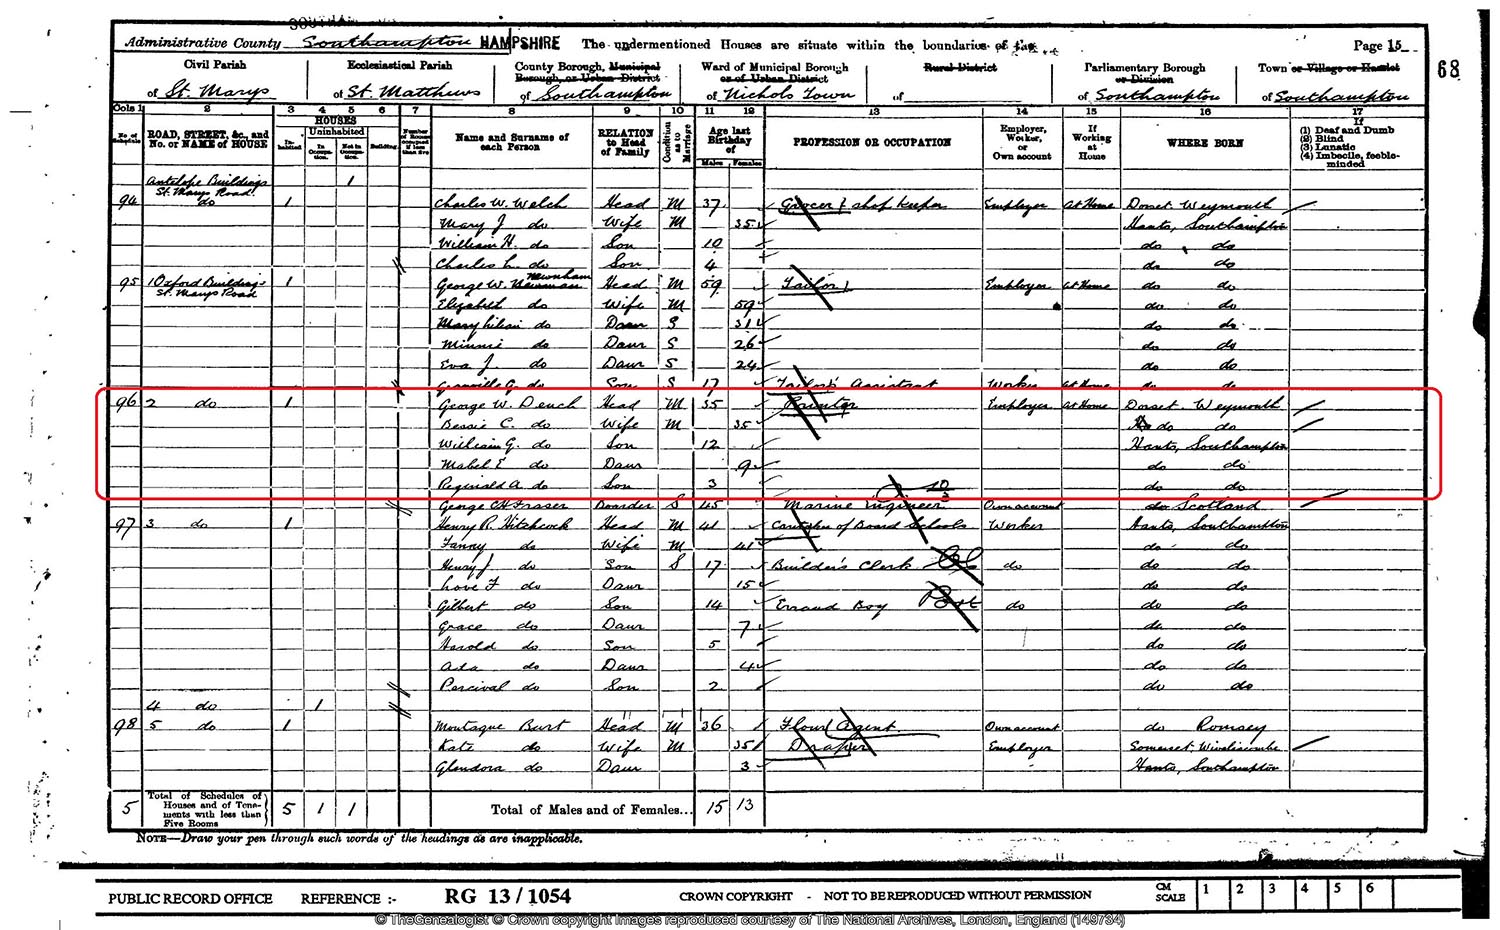 1901 census of Hampshire finds Judi’s grandparents and family before their move to Ireland